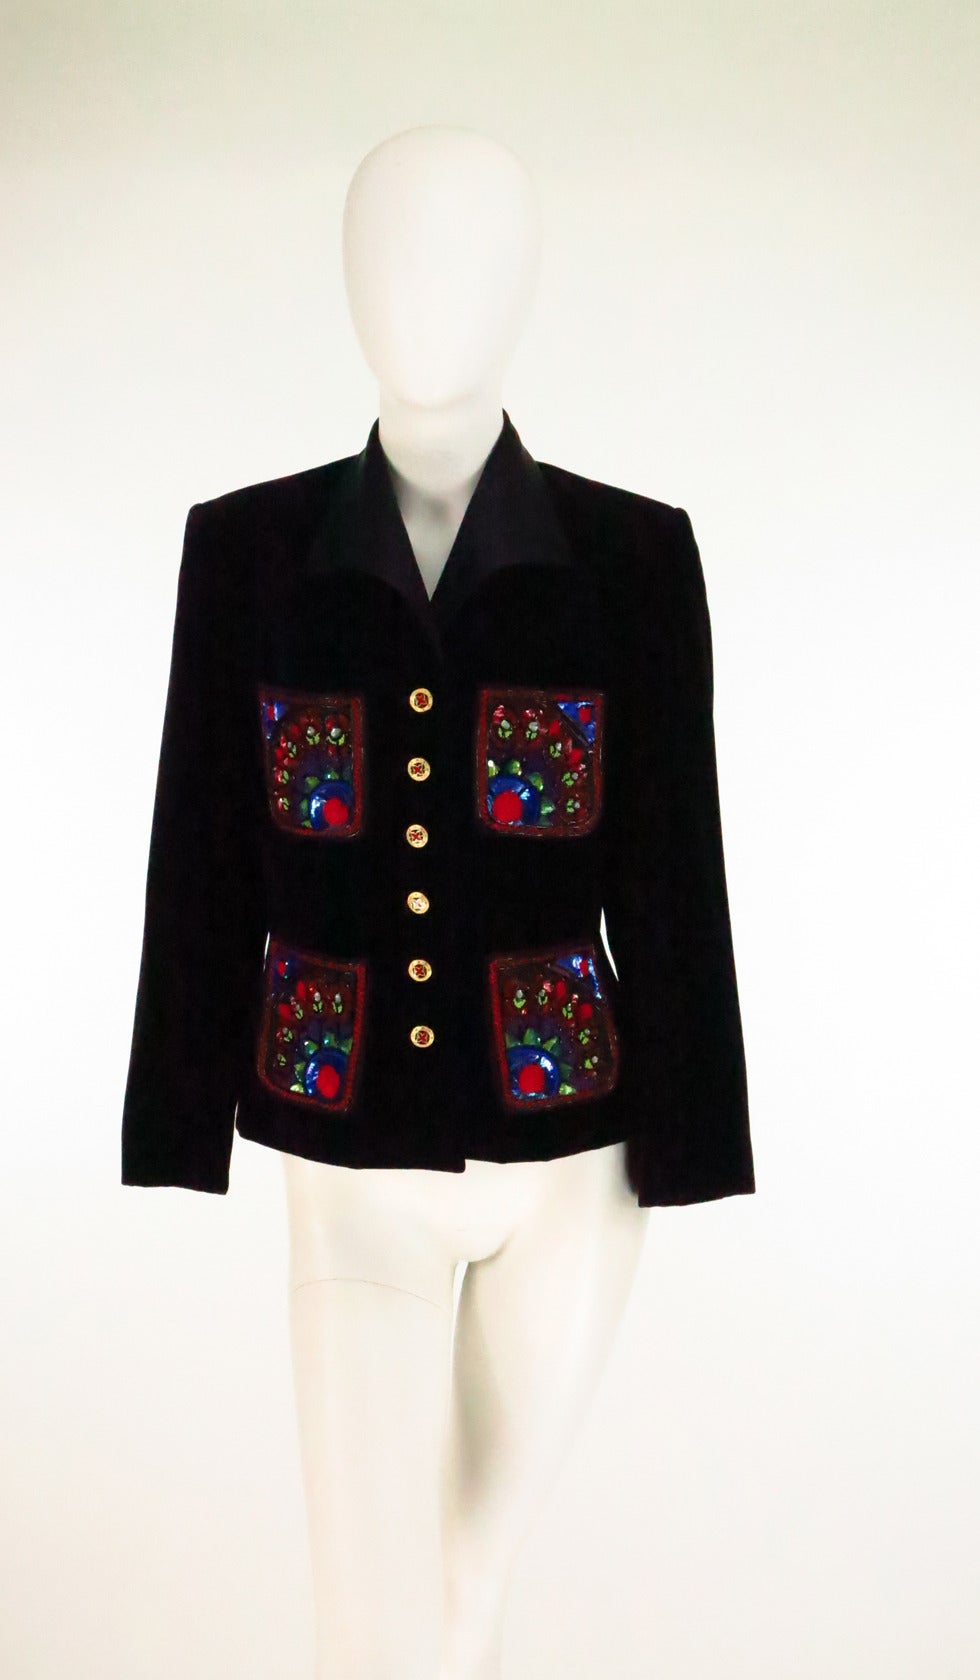 Escada Couture jewel embroidered velvet evening jacket from the 1990s...Single breasted black velvet jacket has 4 patch pockets each heavily decorated in jewel tone beads and sequins...Wing collar in black satin...Enamel and rhinesstone buttons